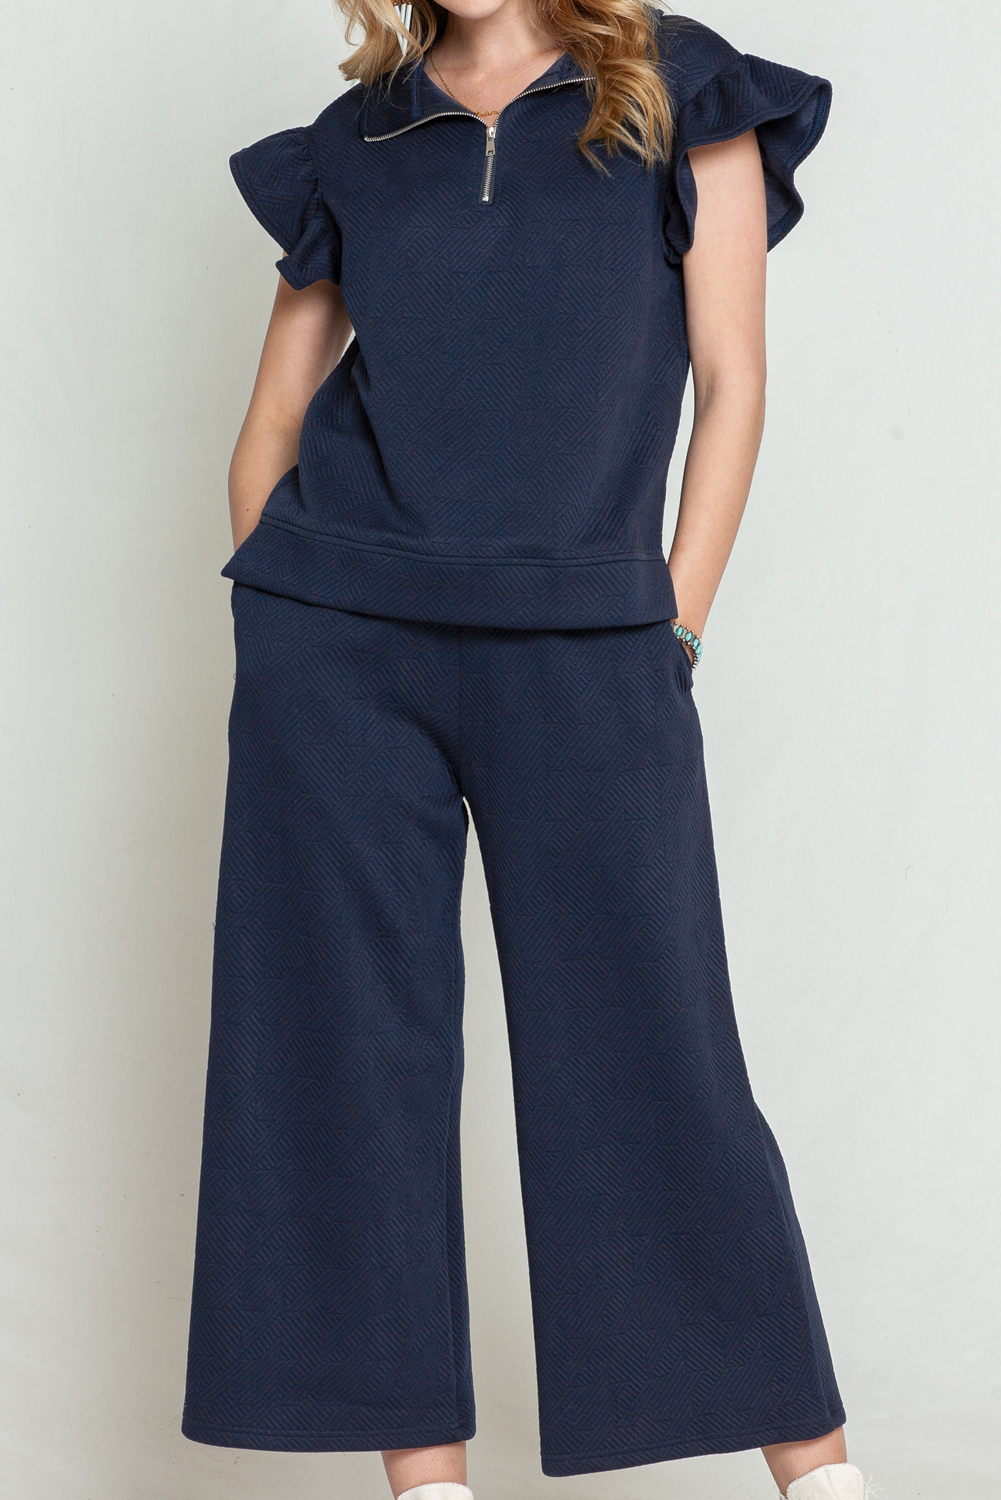 Shewin Wholesale 2024 Hot Navy Blue Textured Ruffle Cap Sleeve Top And Wide Leg PANTS Set